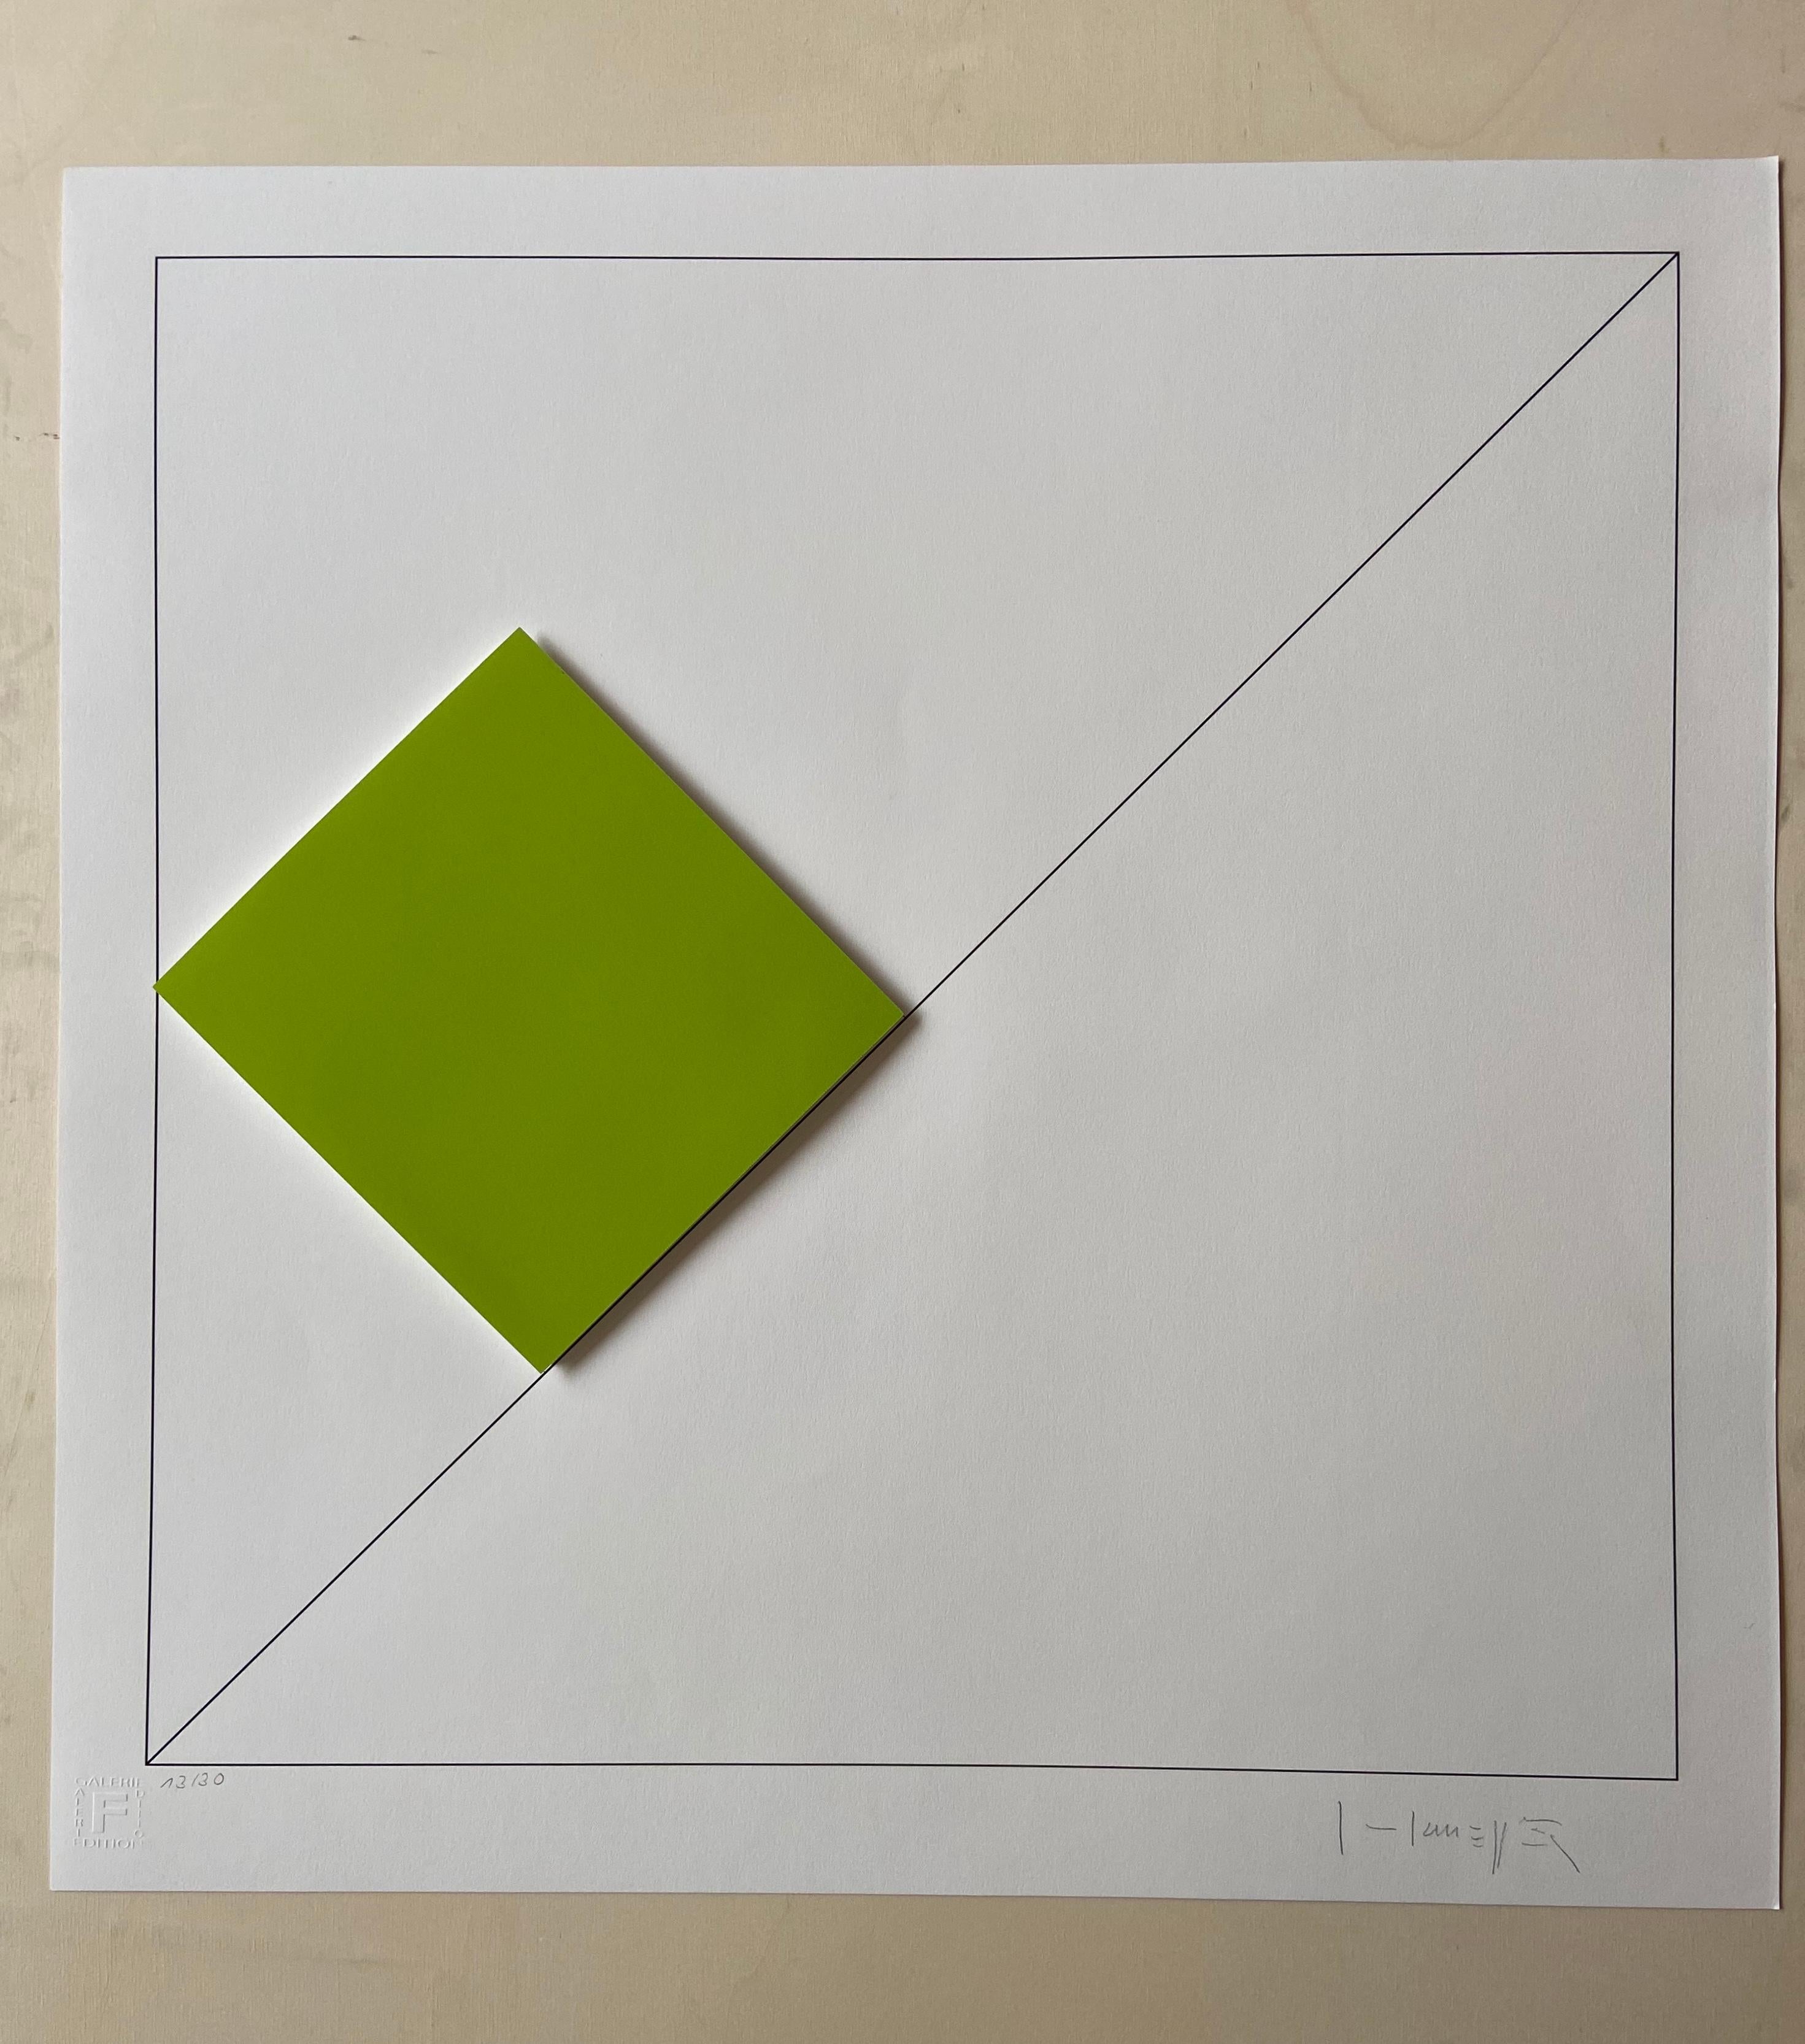 Gottfried Honegger
Composition 1 3D square (green) 
2015
Silkscreen print signed in pencil and numbered on 30 copies by the artist.
Dry stamp of the publisher in the margin at the lower left corner.
Condition: excellent; the work has never been